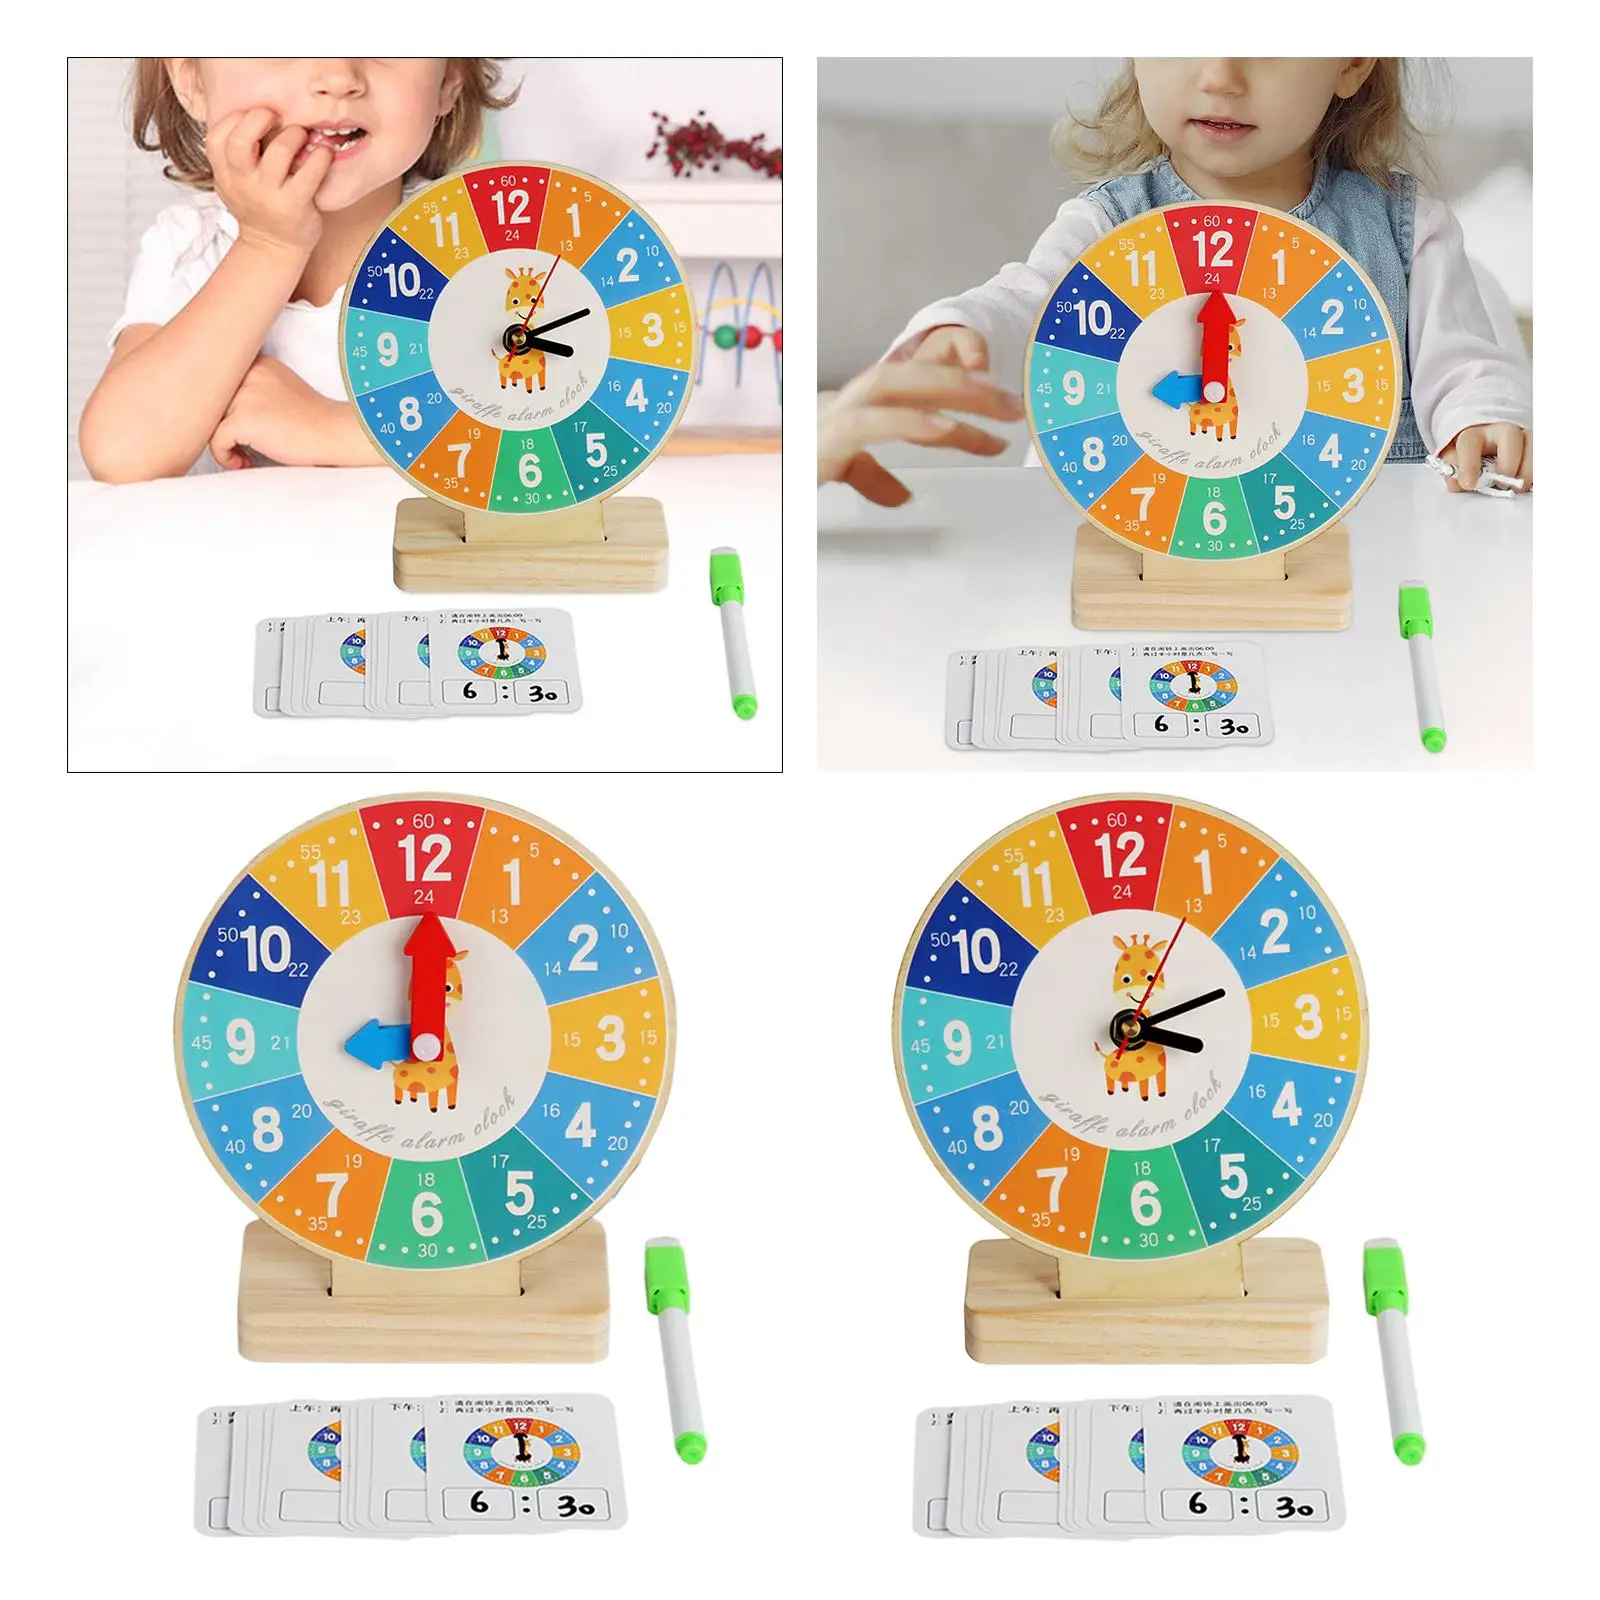 Sensory Toy Educational Gift Telling Time Motor Skills Kids Teaching Clocks for Learning Activities Teaching Aids Boys and Girls